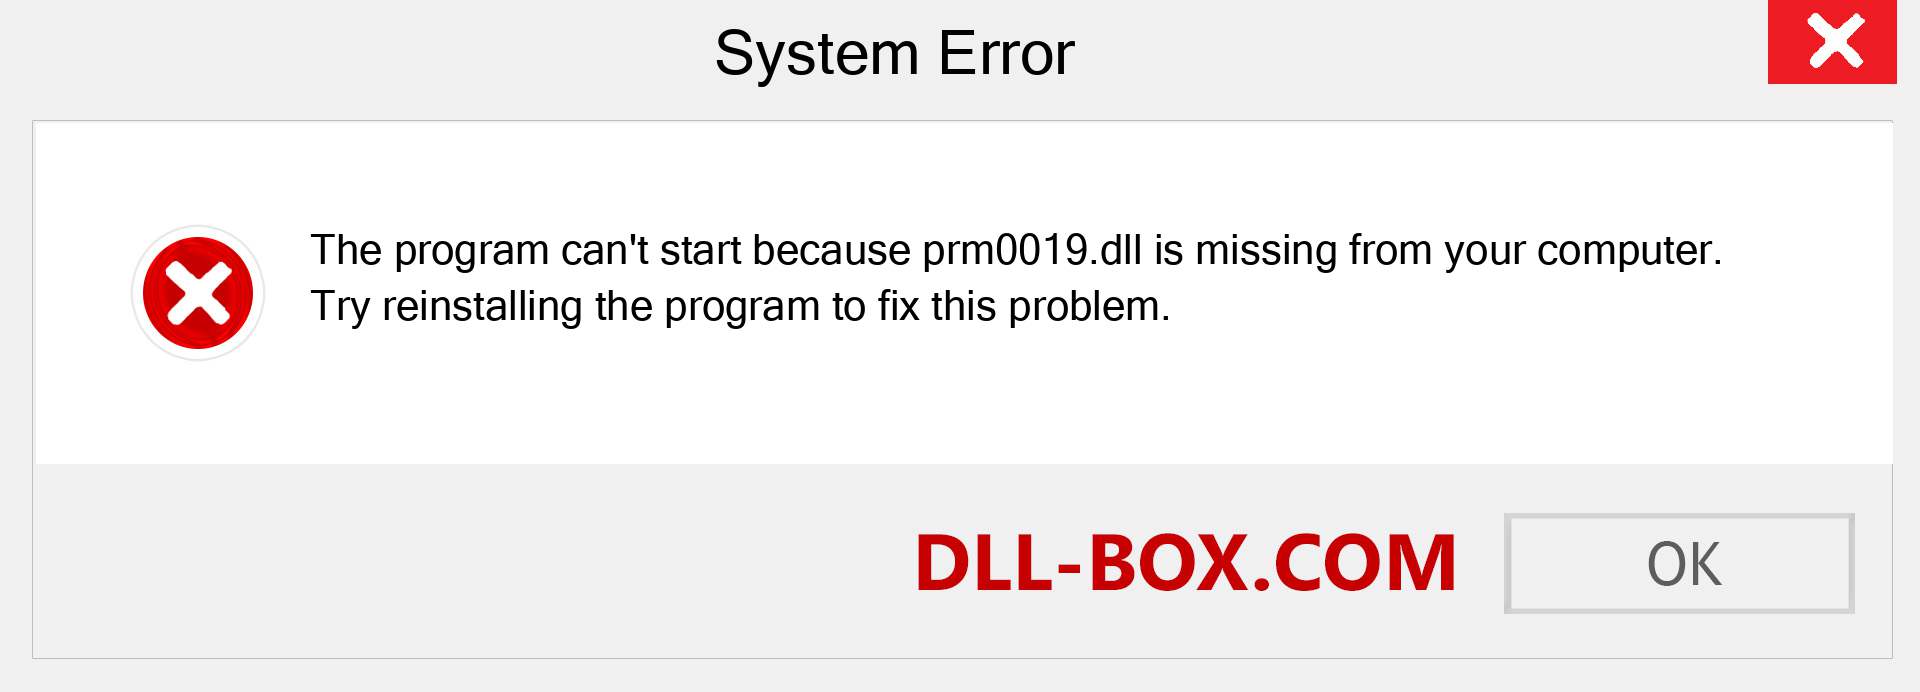  prm0019.dll file is missing?. Download for Windows 7, 8, 10 - Fix  prm0019 dll Missing Error on Windows, photos, images